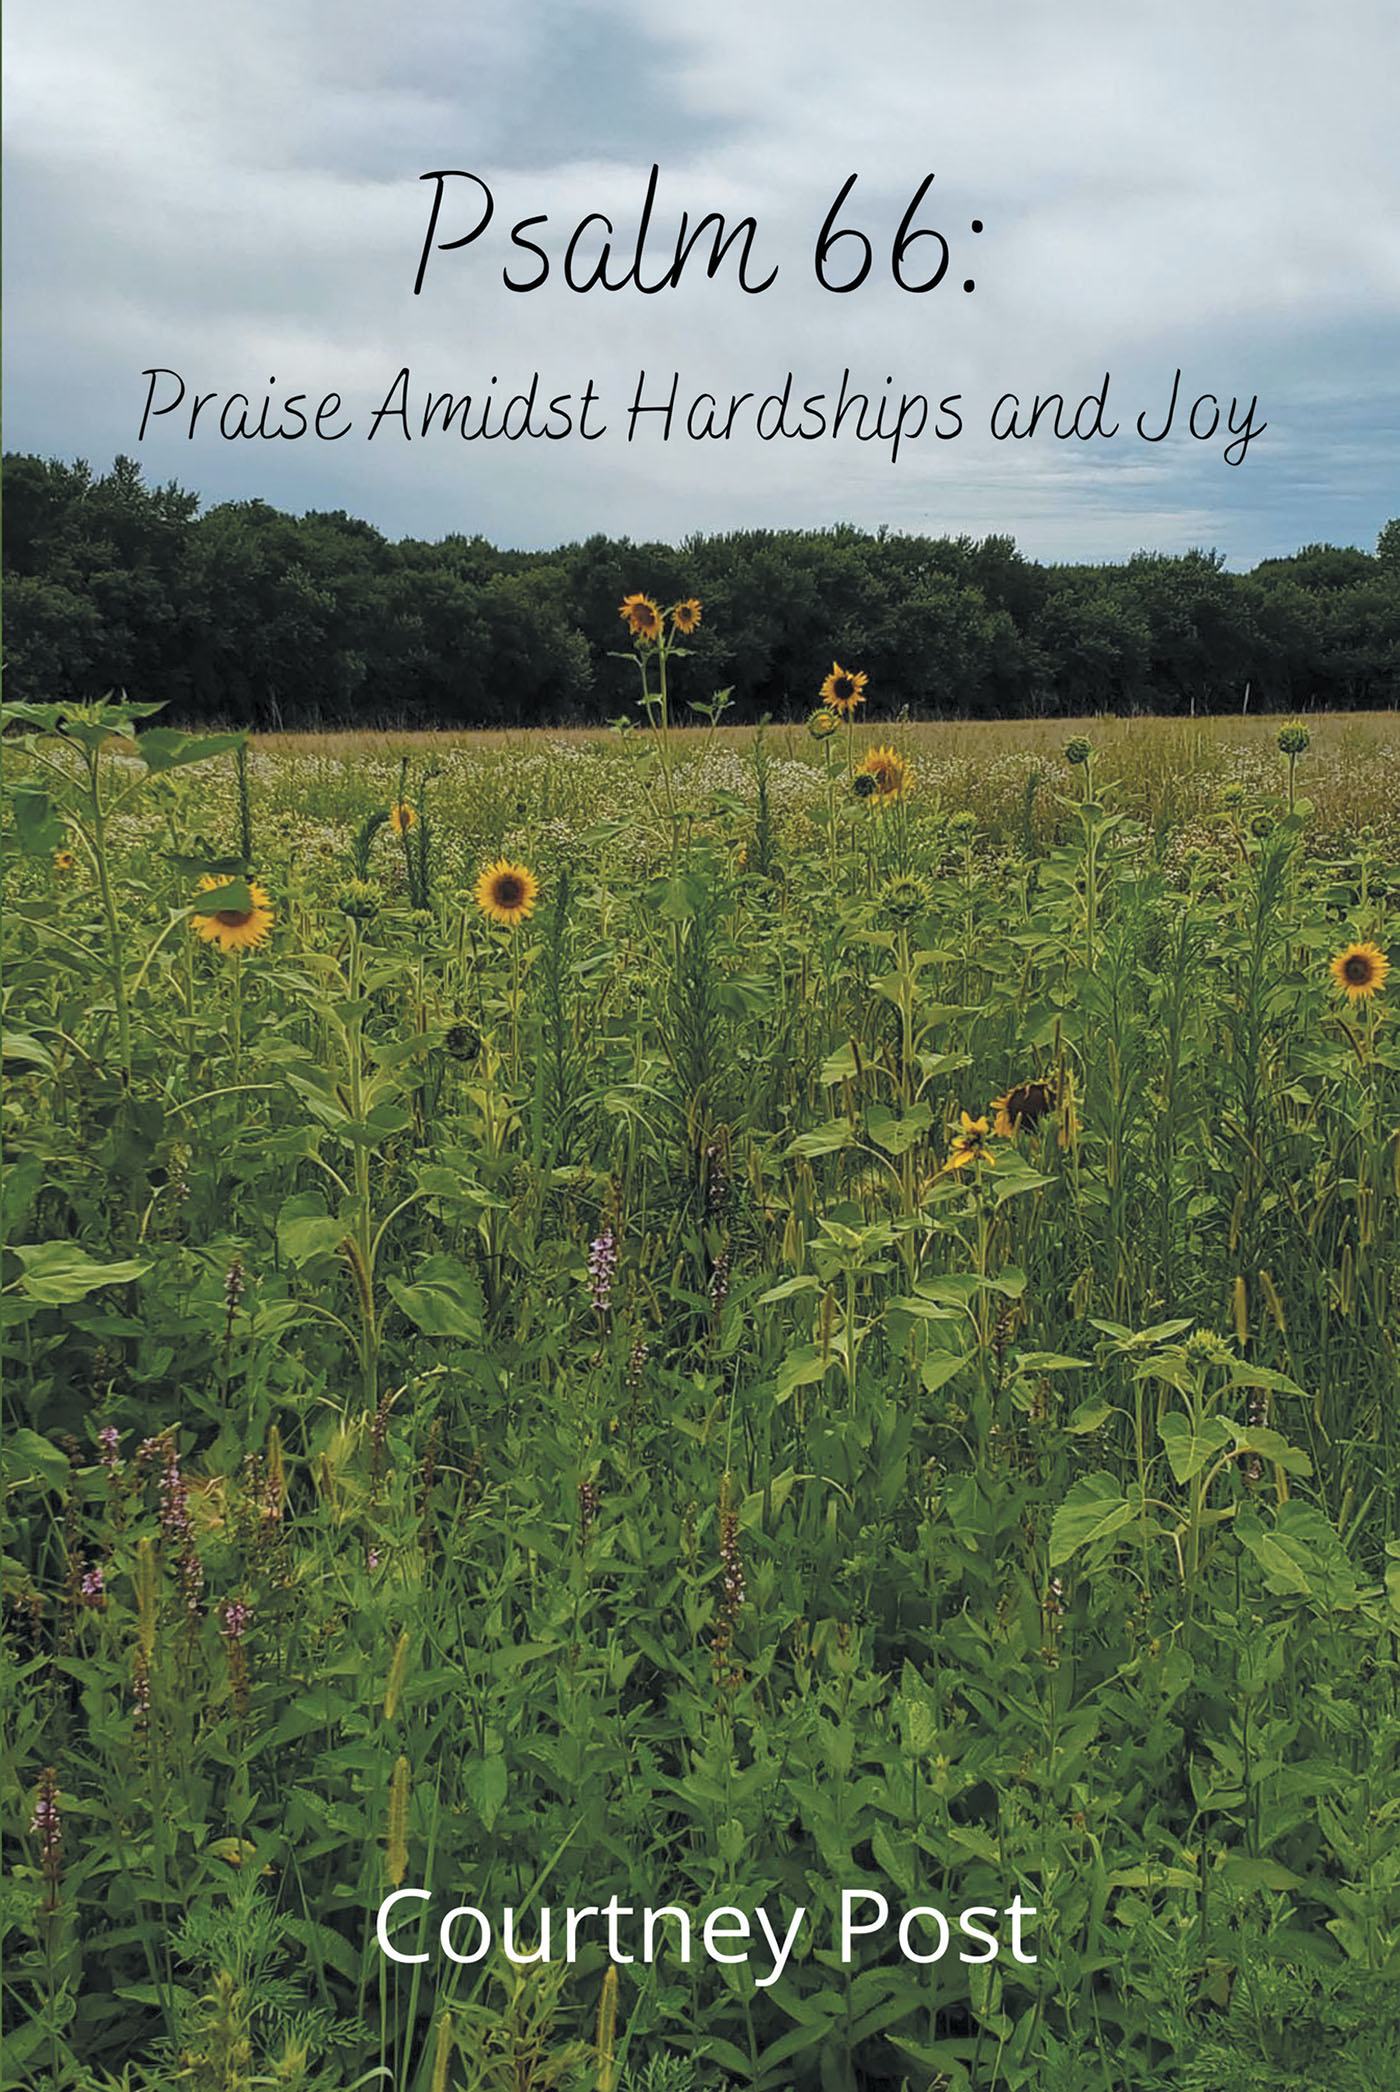 Author Courtney Post’s New Book, “Psalm 66: Praise amidst Hardships and Joy,” is a 20-Day Devotional That Takes a Deep Dive Into the Psalm Writer’s Highs and Lows